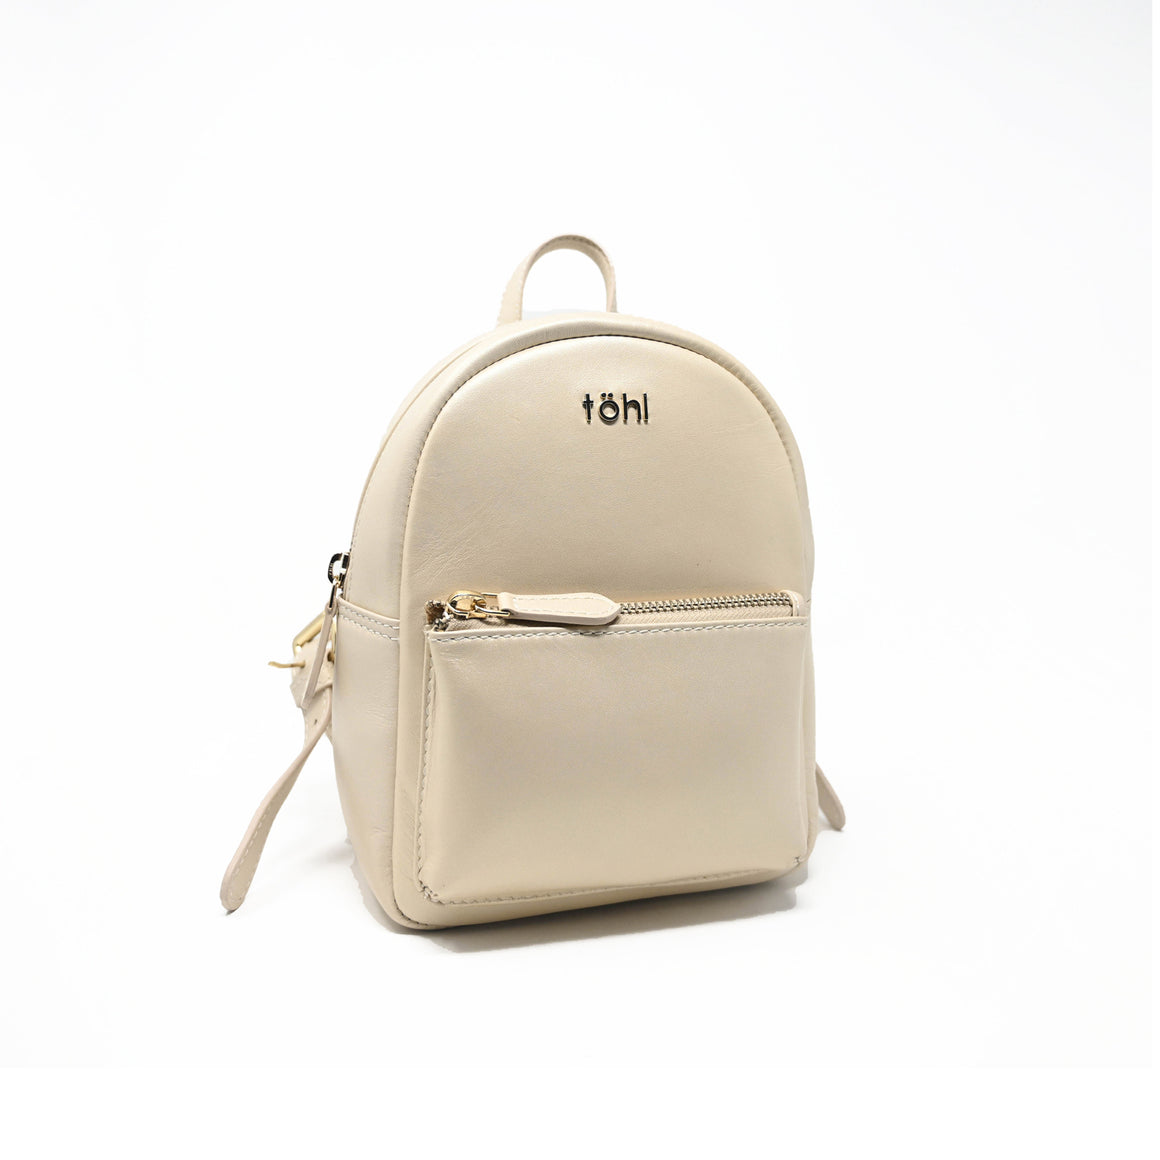 NEVERN WOMEN'S BACKPACK - CHAMPAGNE PEARL